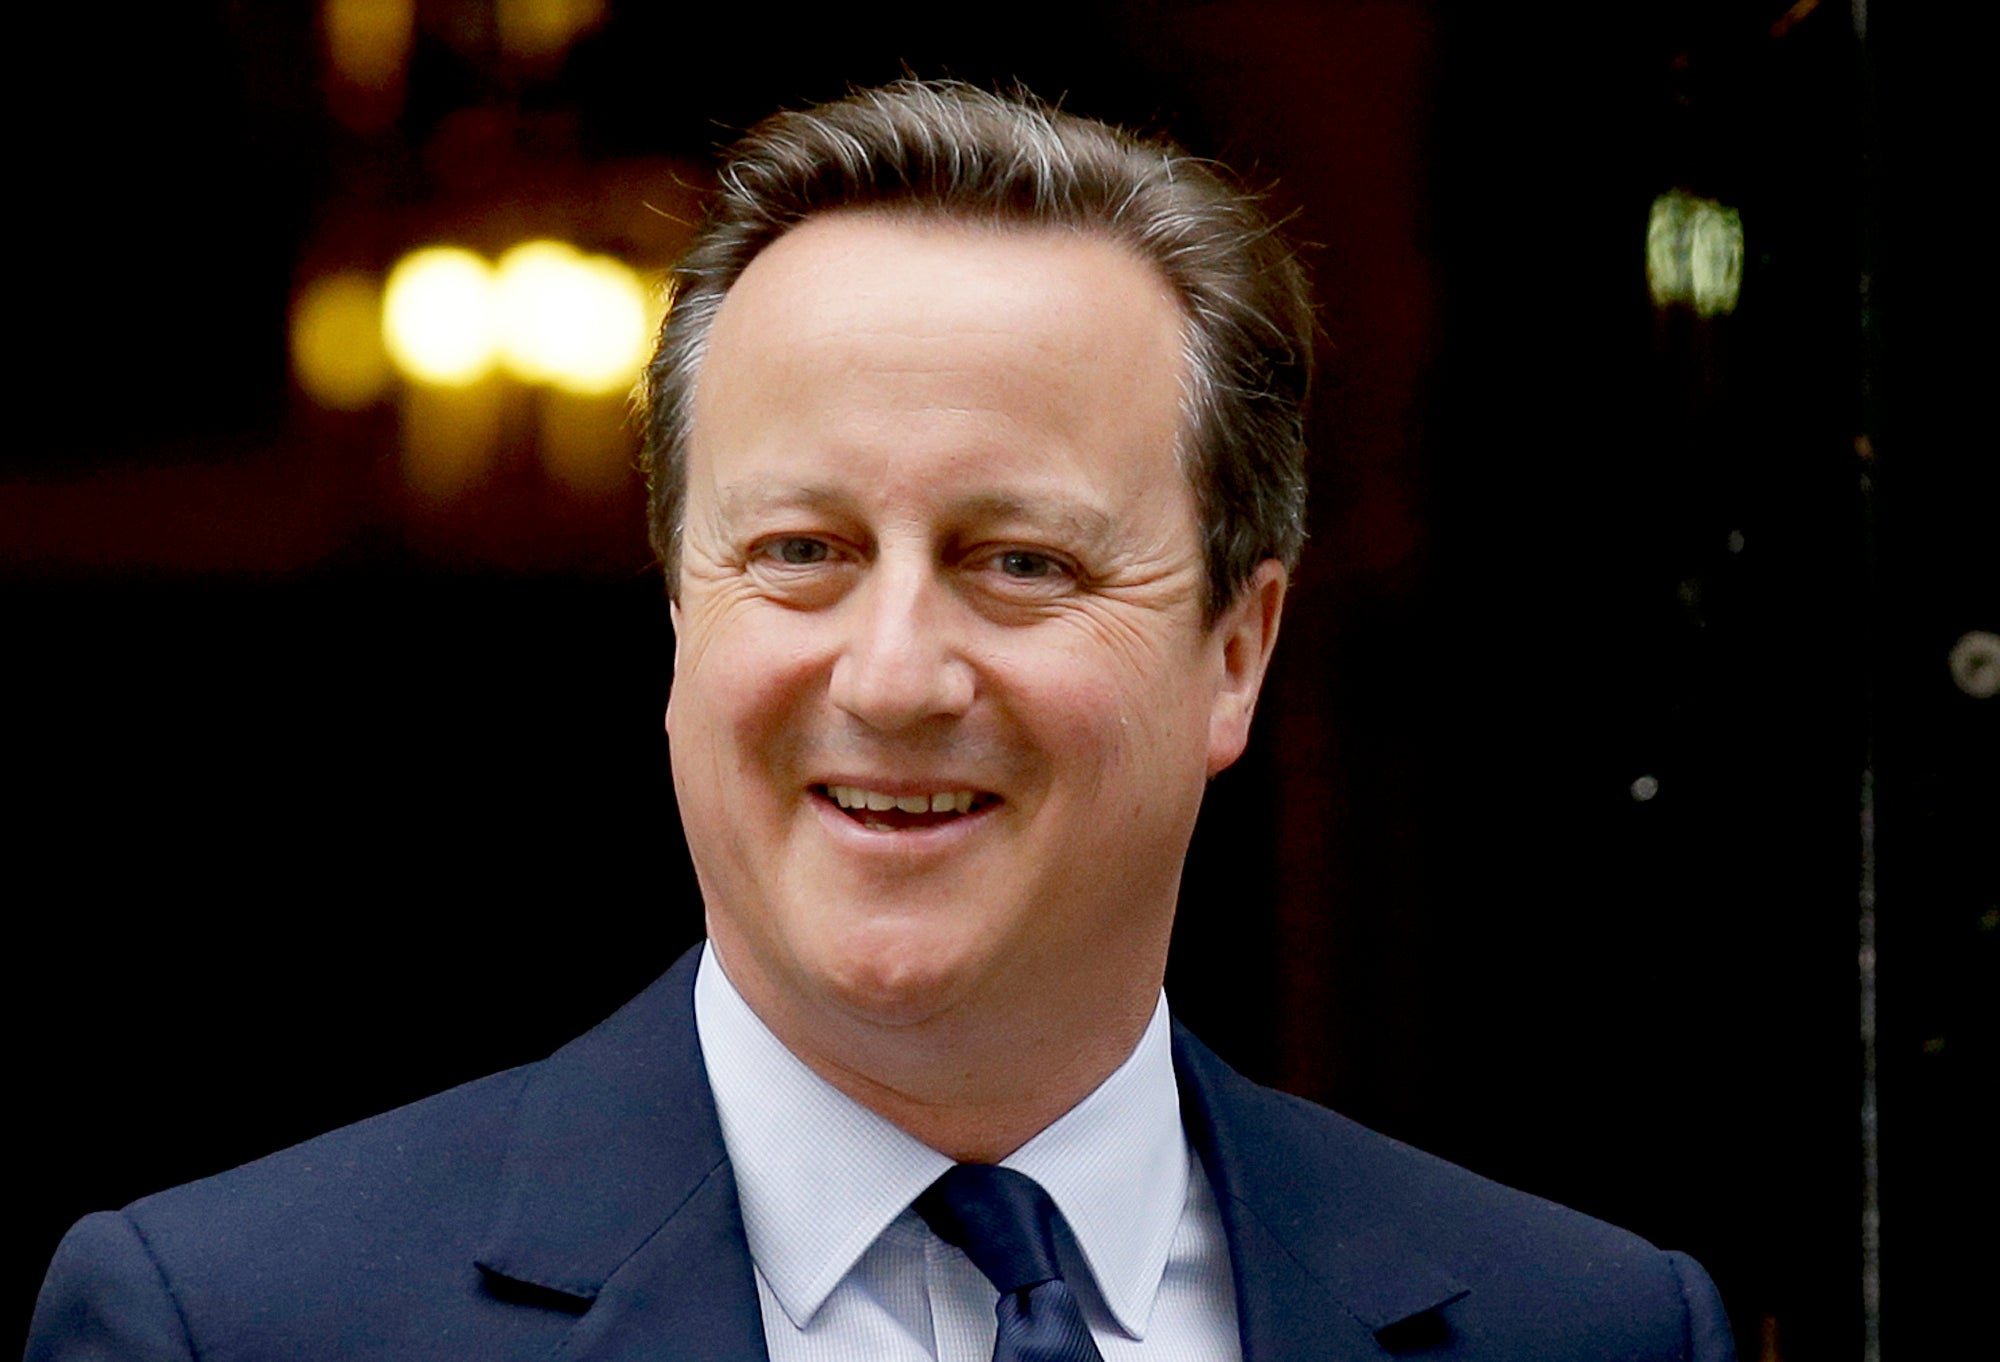 David Cameron has said he will ‘respond positively’ to lobbying inquiry